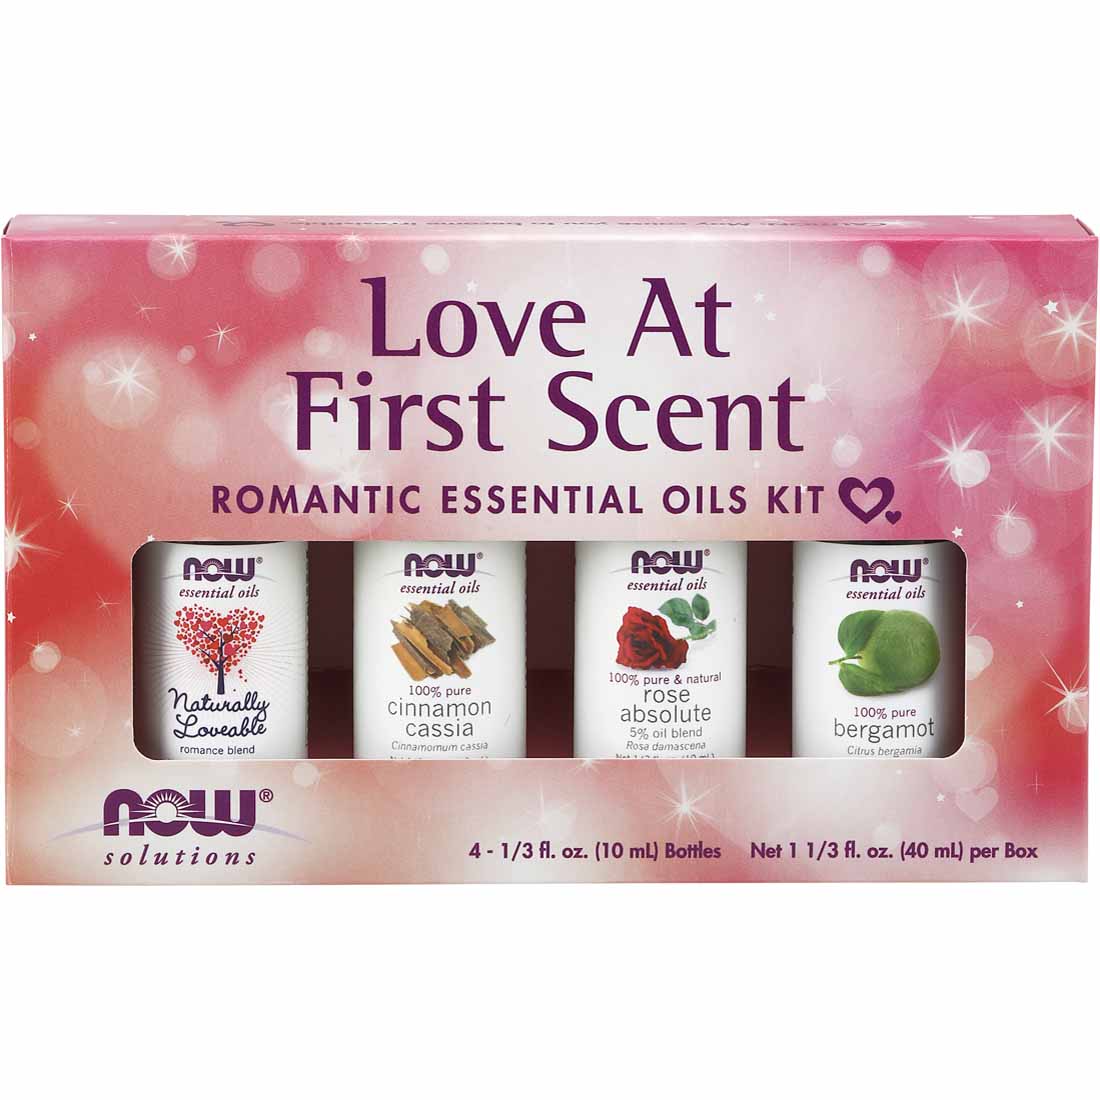 NOW Love at First Scent Romantic Essential Oils Kit, 4 x 10ml Bottles